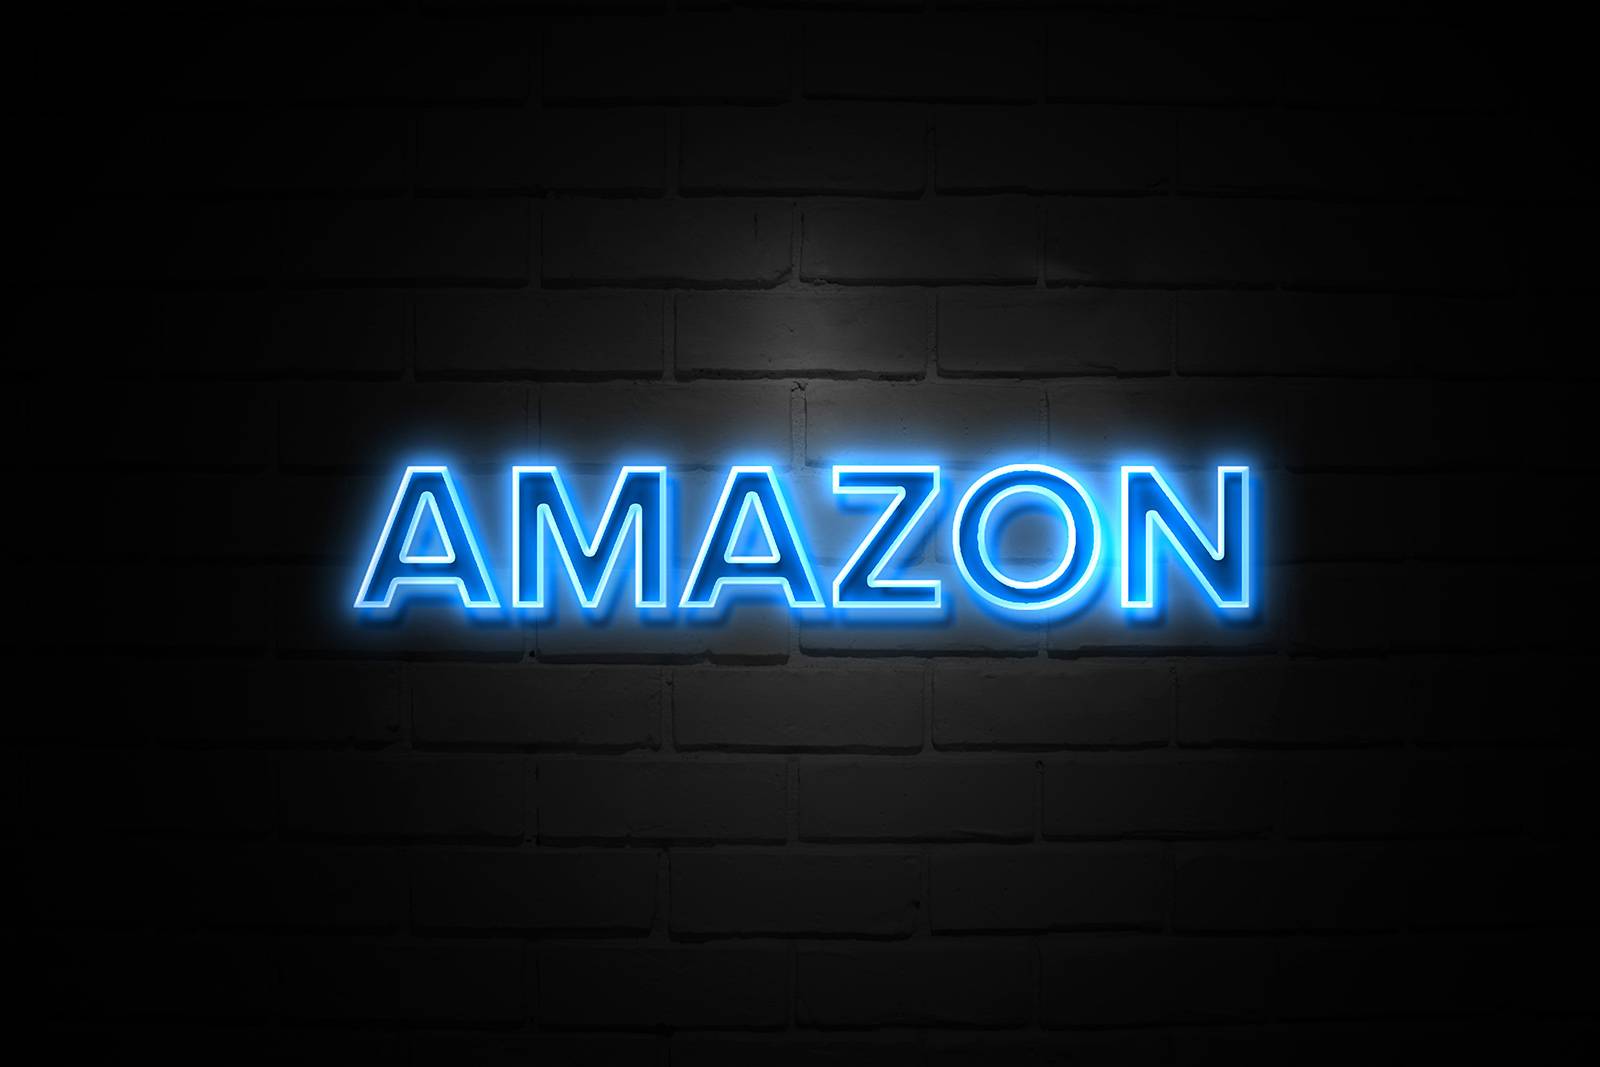 Amazon tournament wrap up: The full thrilling new devices unveiled nowadays